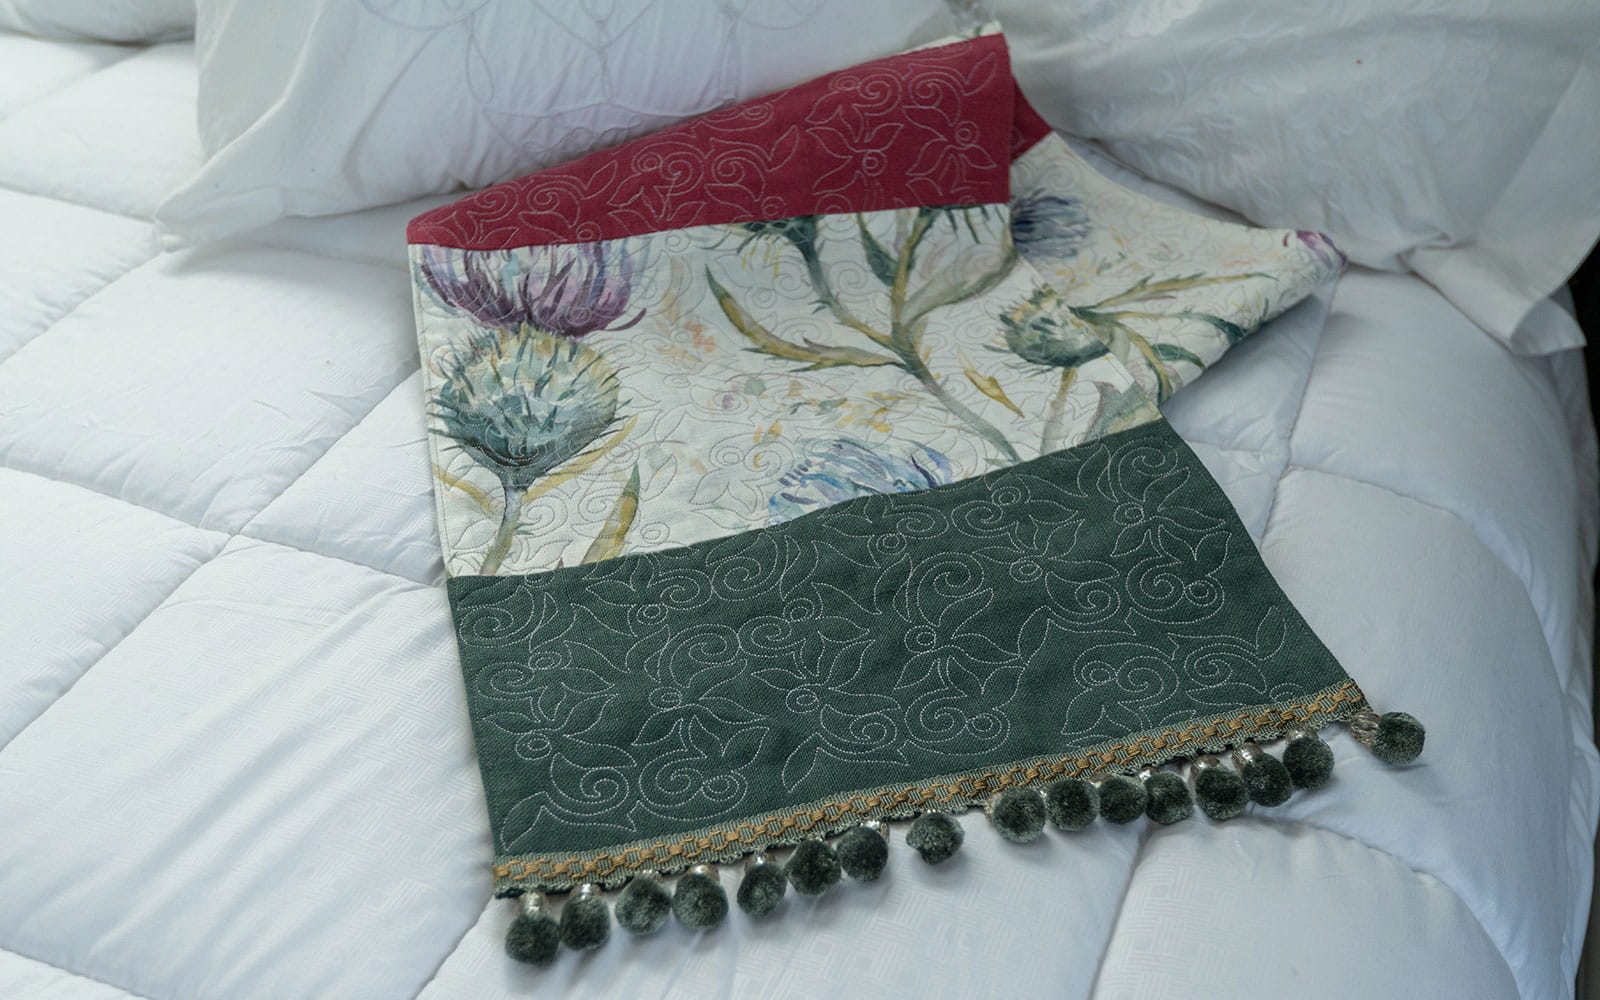 Close up of swirly embroidering on red and green bed runner place